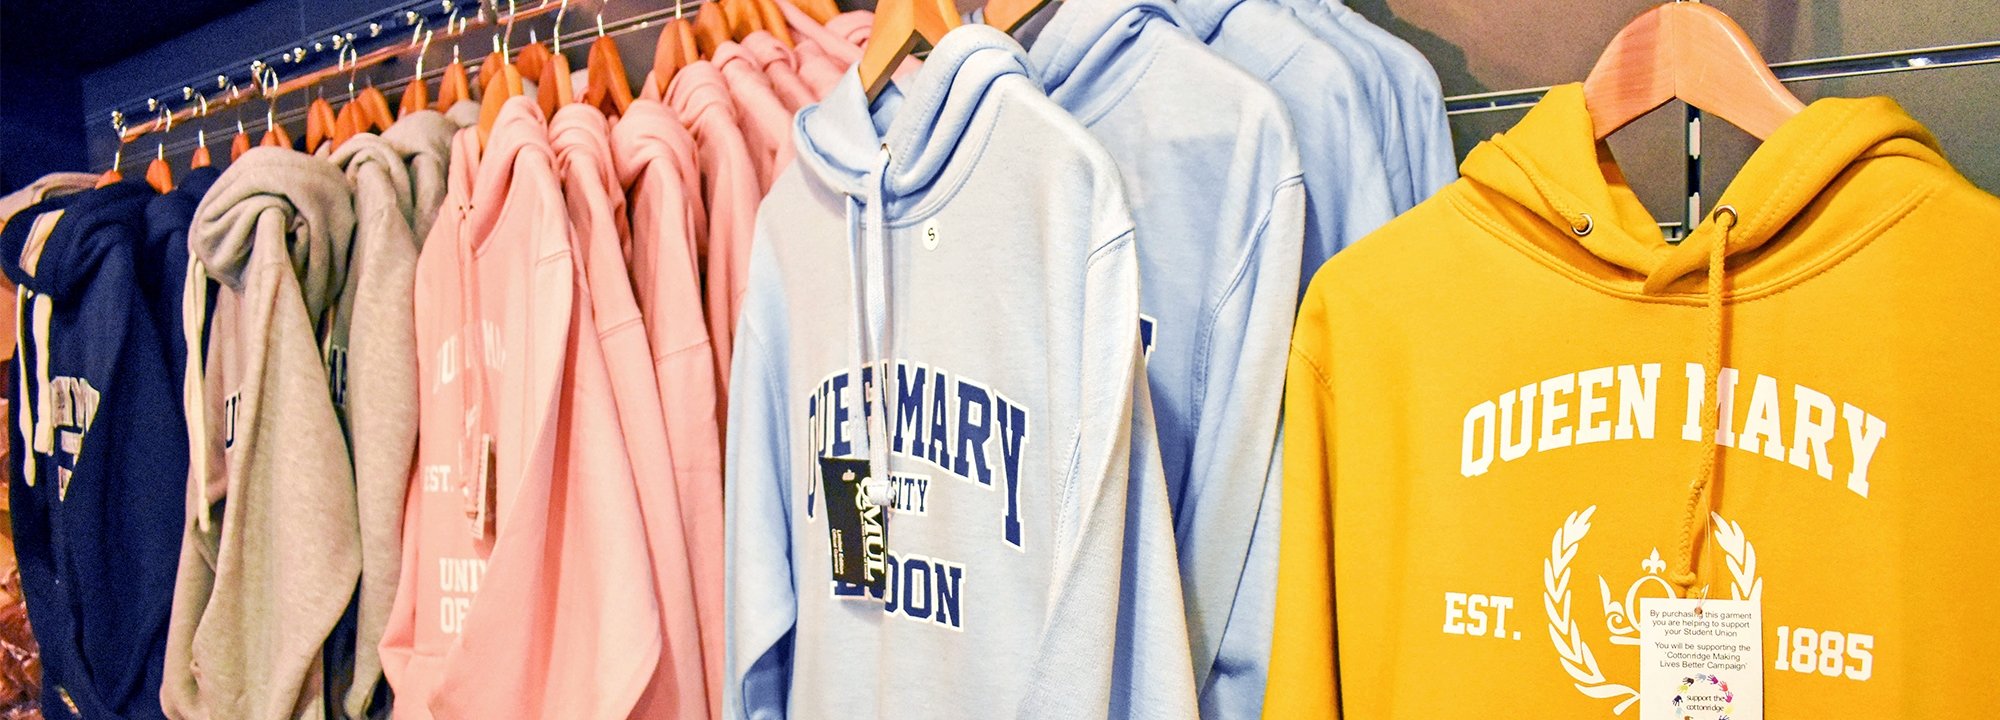 The Union Shop is your one-stop shop for day-to-day essentials, stationery and Official QMUL branded clothing and merchandise. You can also grab a freshly-made shake, smoothie or coffee to go.